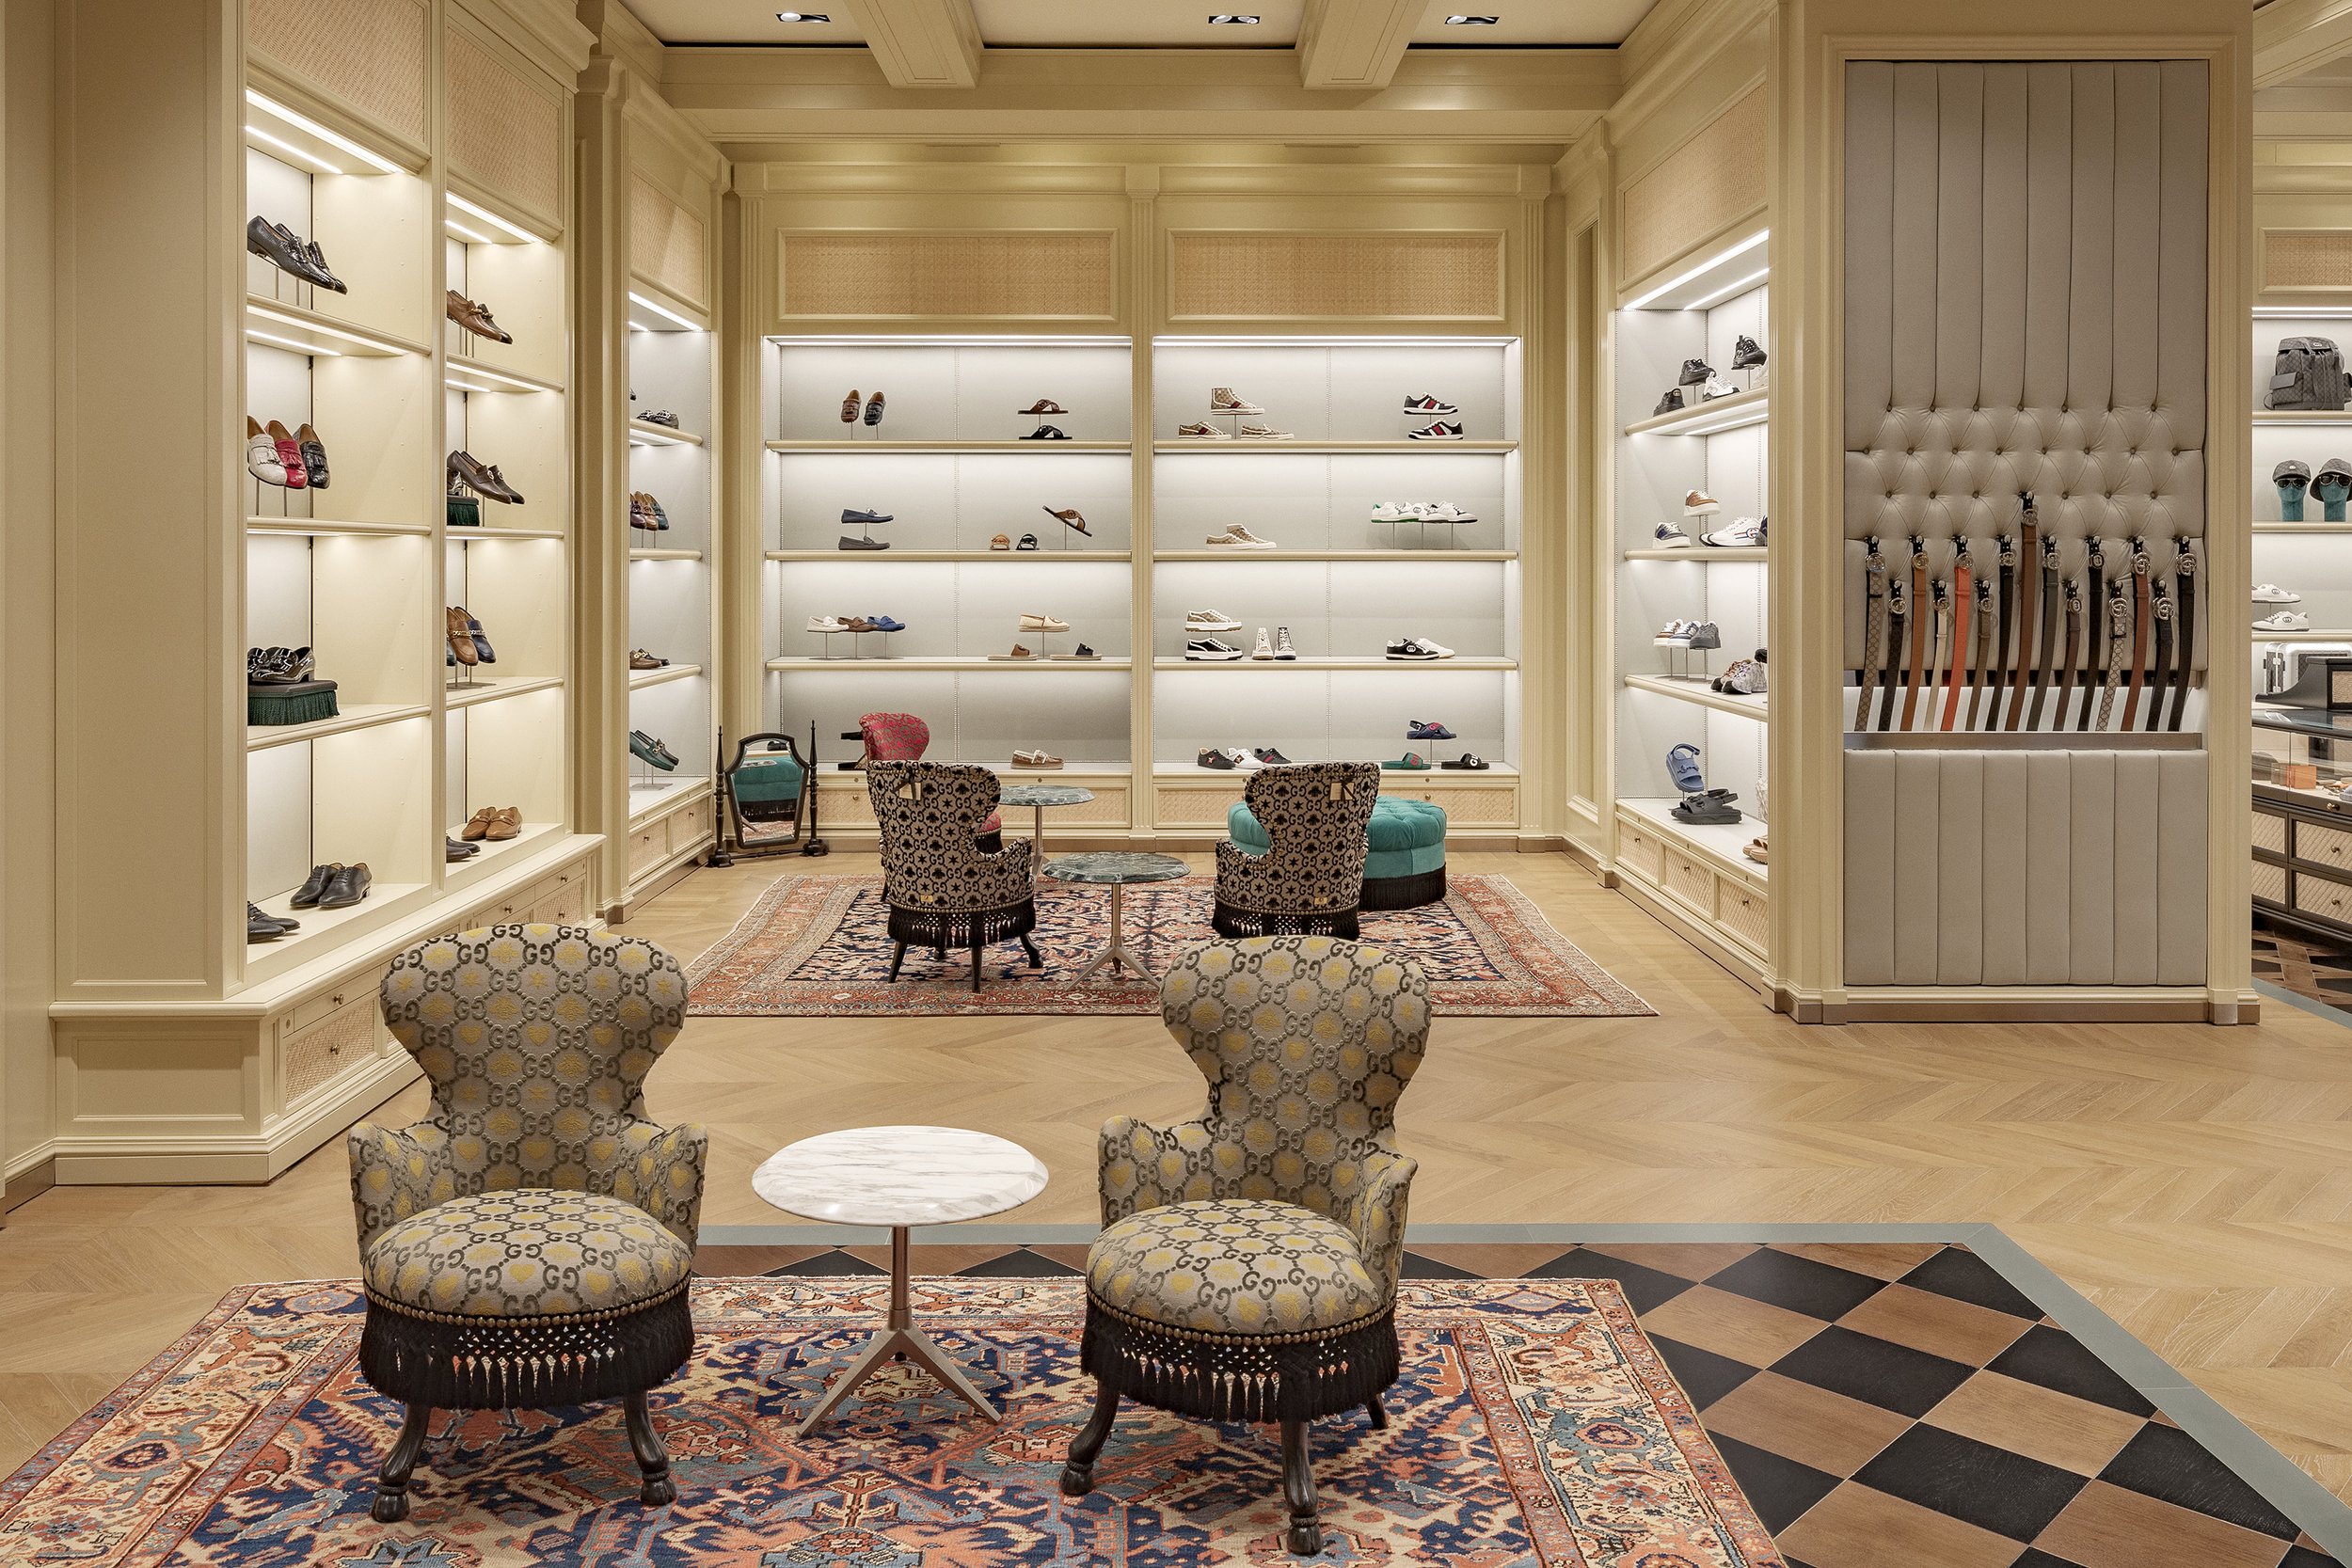 Gucci Opens Newly Expanded Two-Story Lavish Boutique At Bal Harbour ...